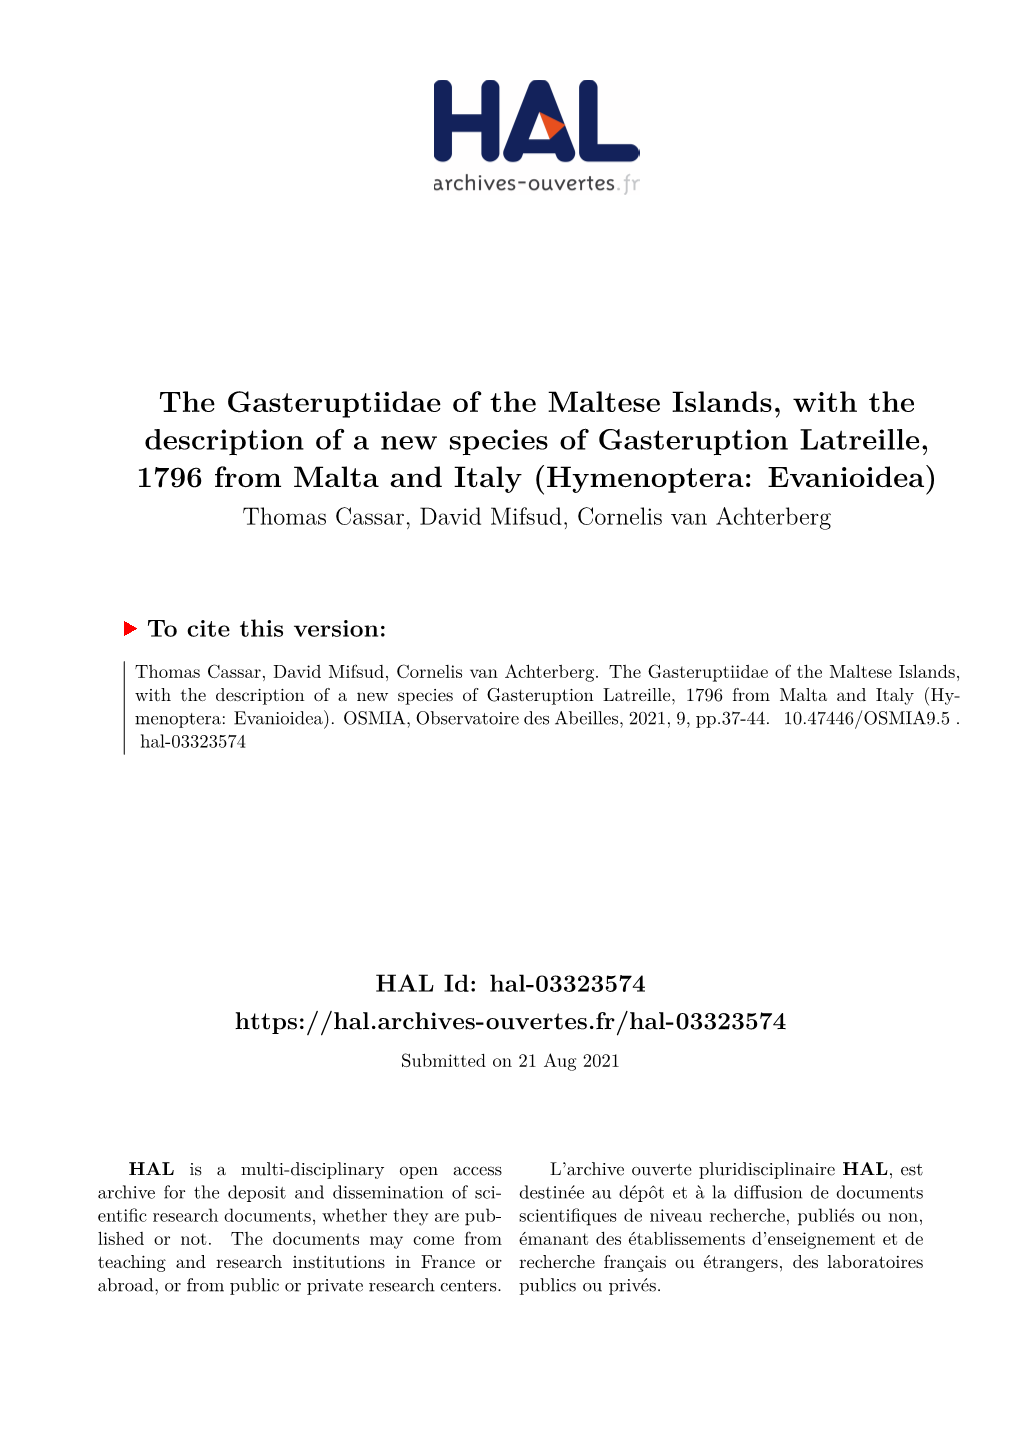 The Gasteruptiidae of the Maltese Islands, with the Description of A